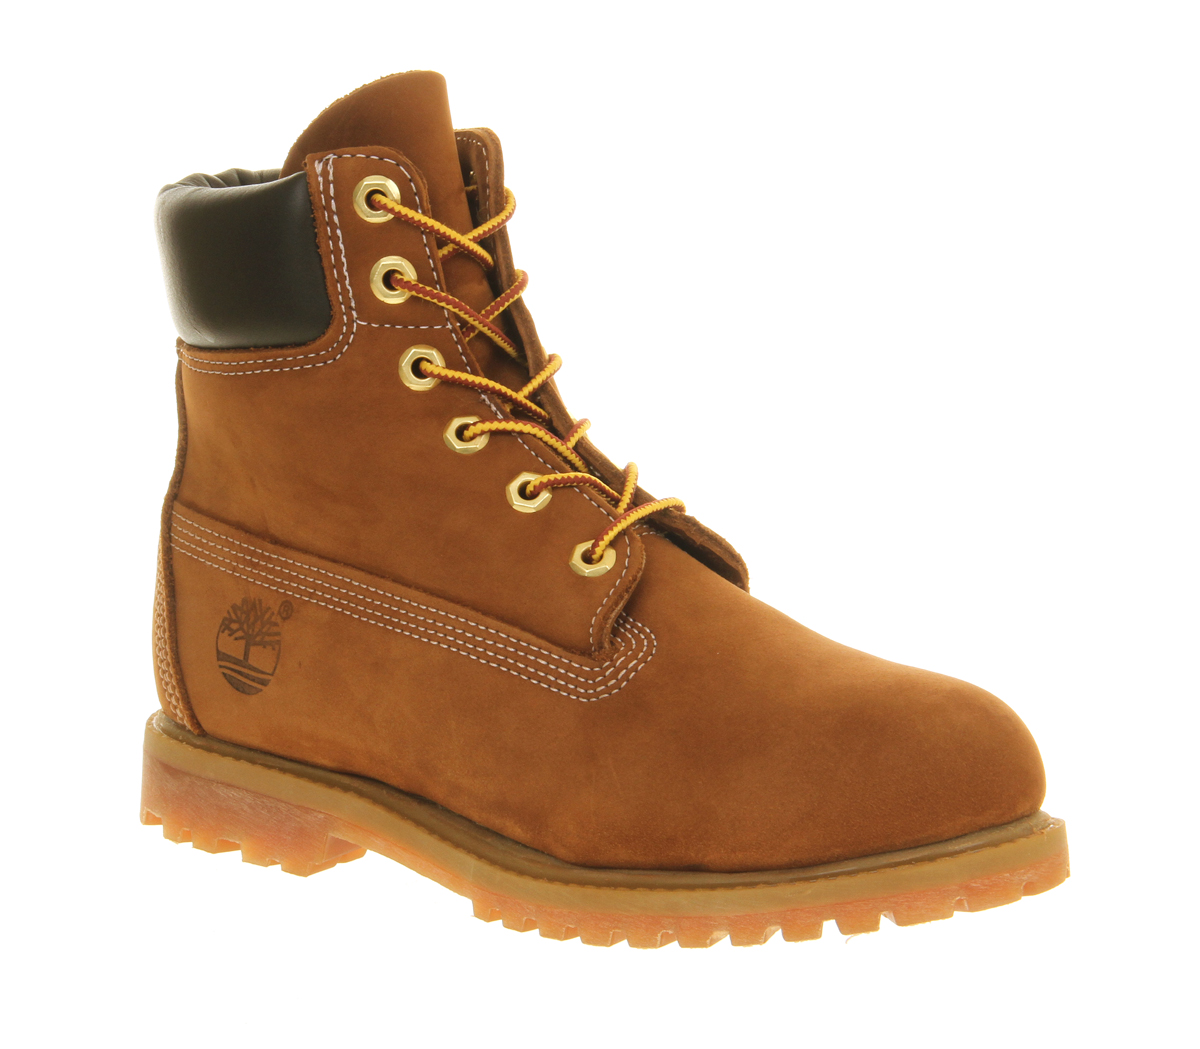 Timberland Premium 6 Boots Rust Nubuck - Women's Ankle Boots